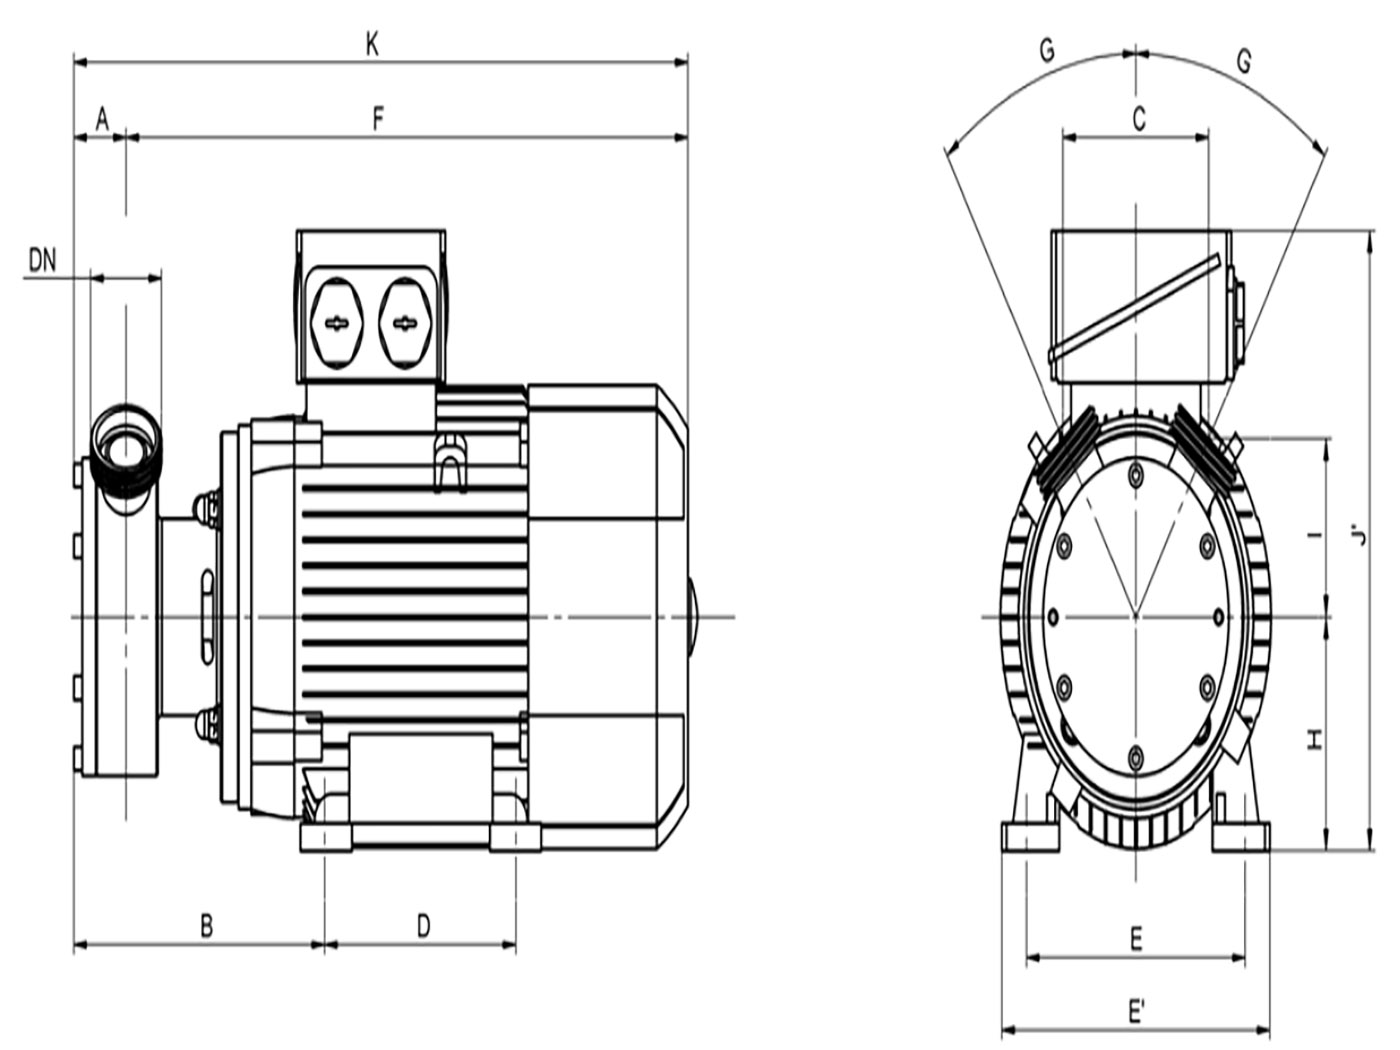 CP Peripheral impeller pump structure